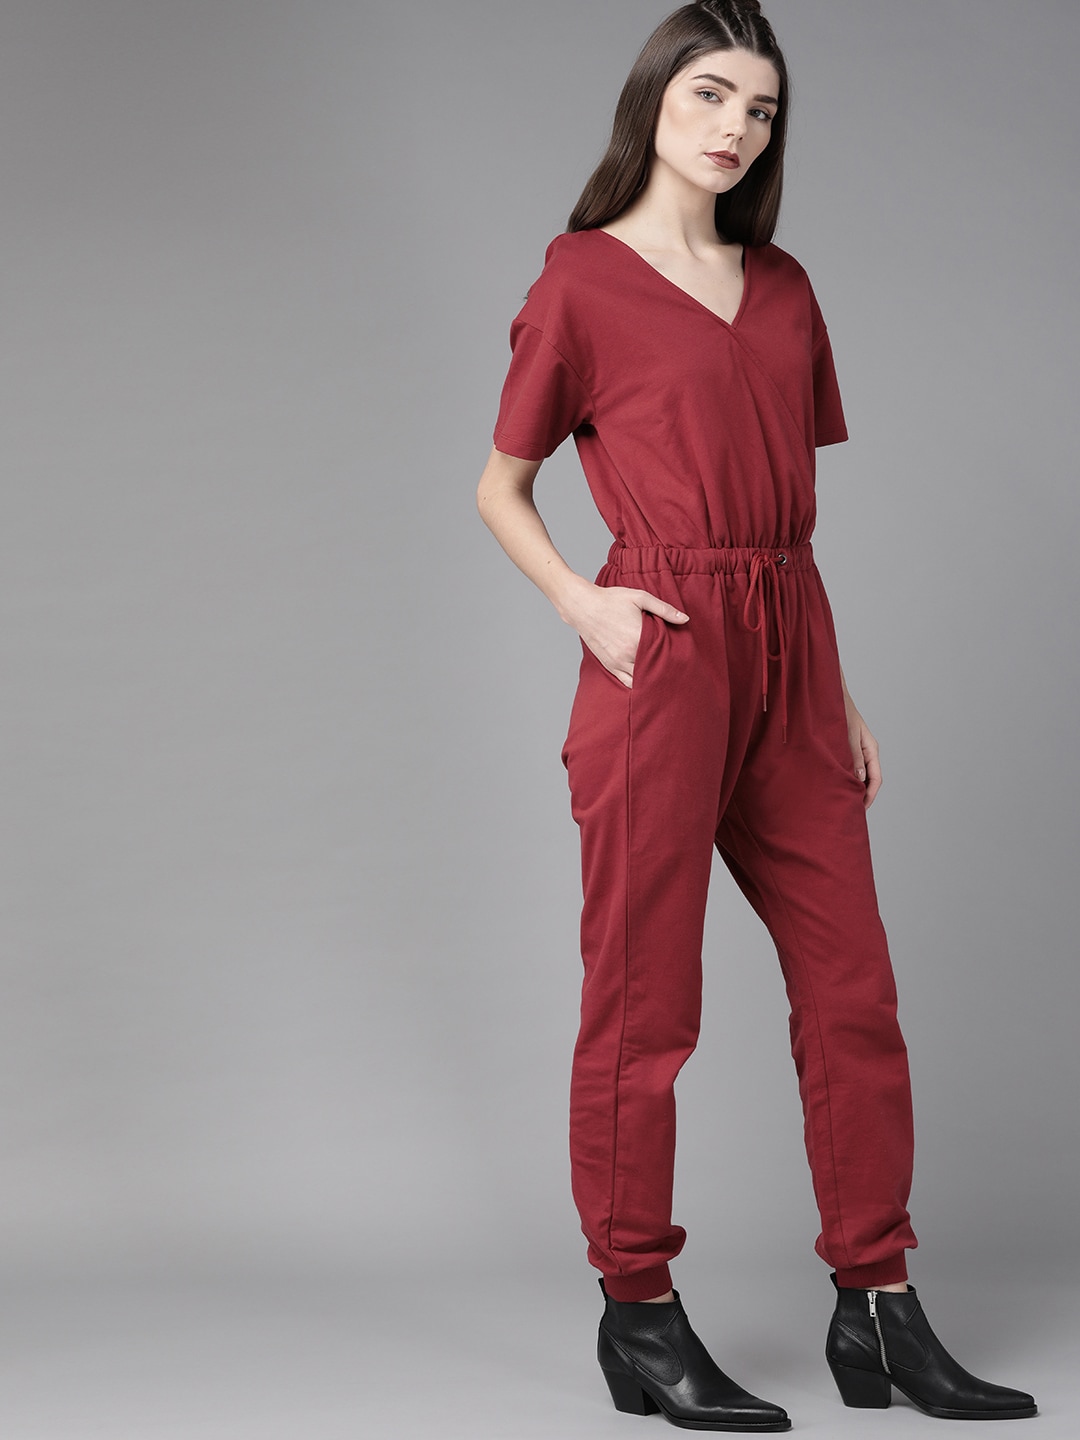 Roadster Women Maroon Solid Basic Jumpsuit Price in India